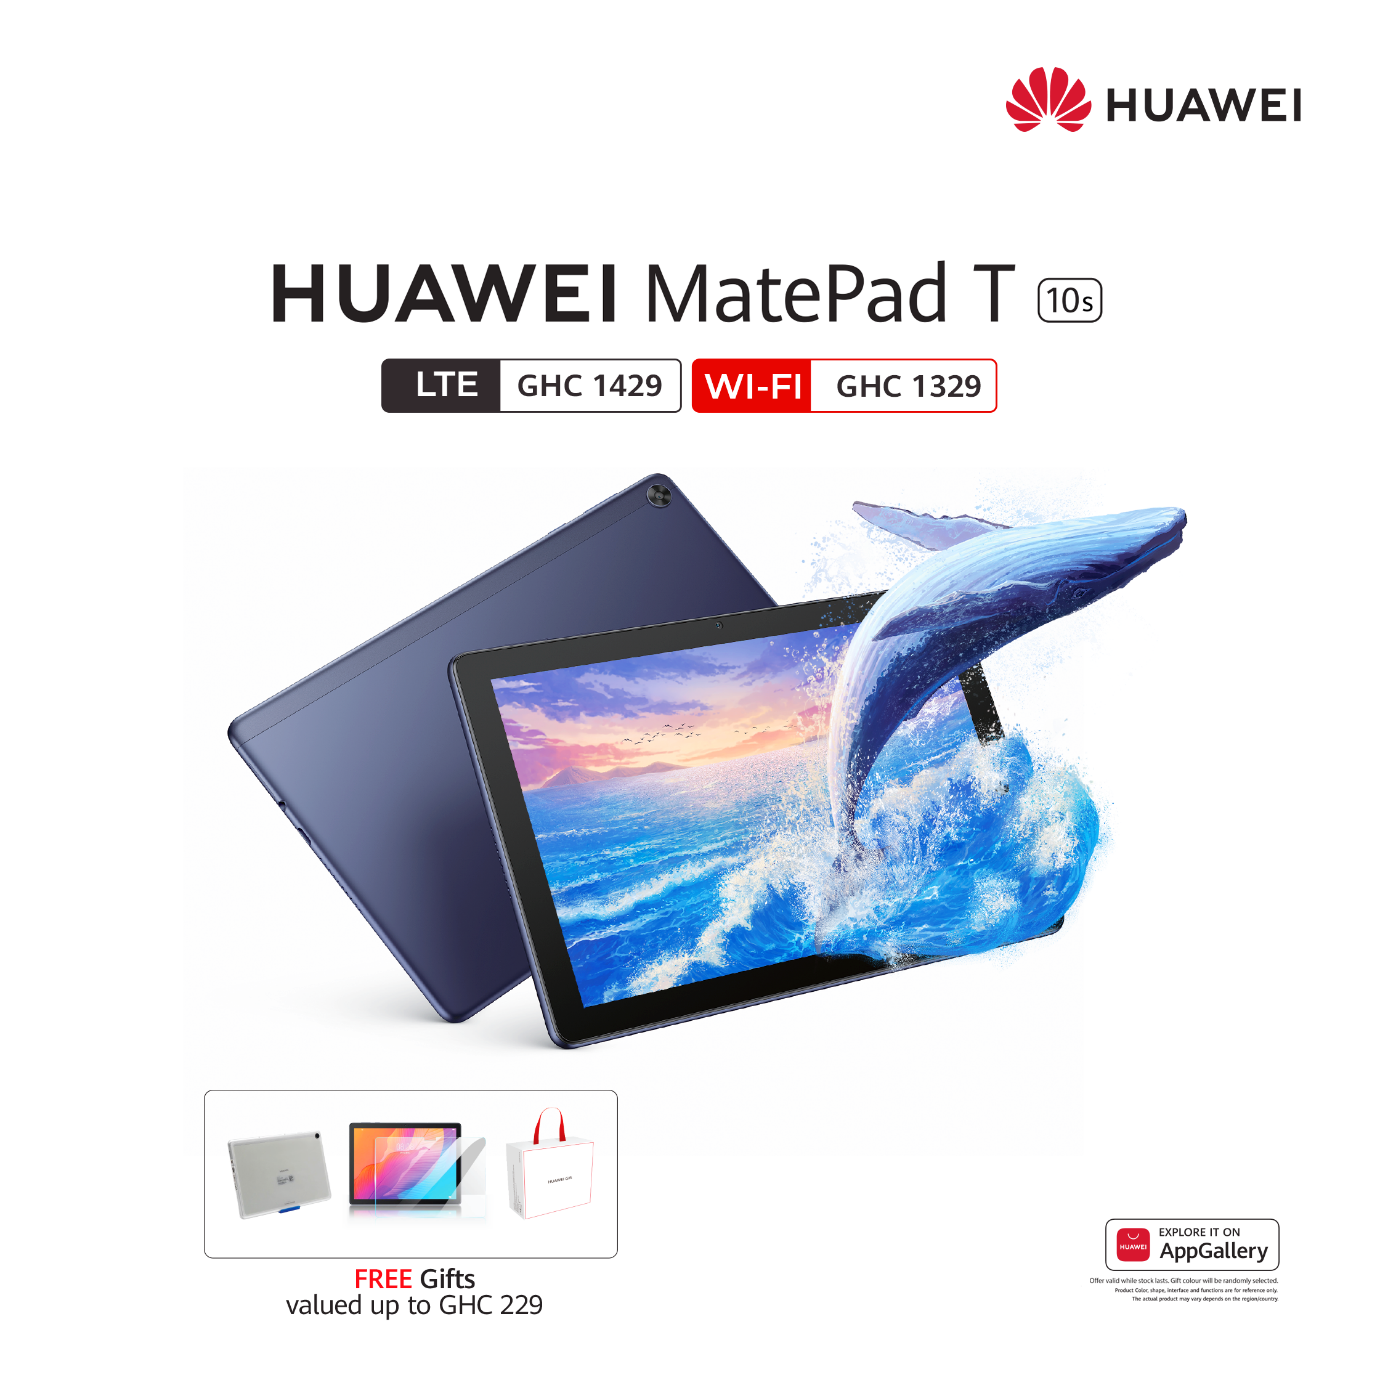 Experience Education and Entertainment on the Go with HUAWEI MatePad T 10 and HUAWEI MatePad T 10s